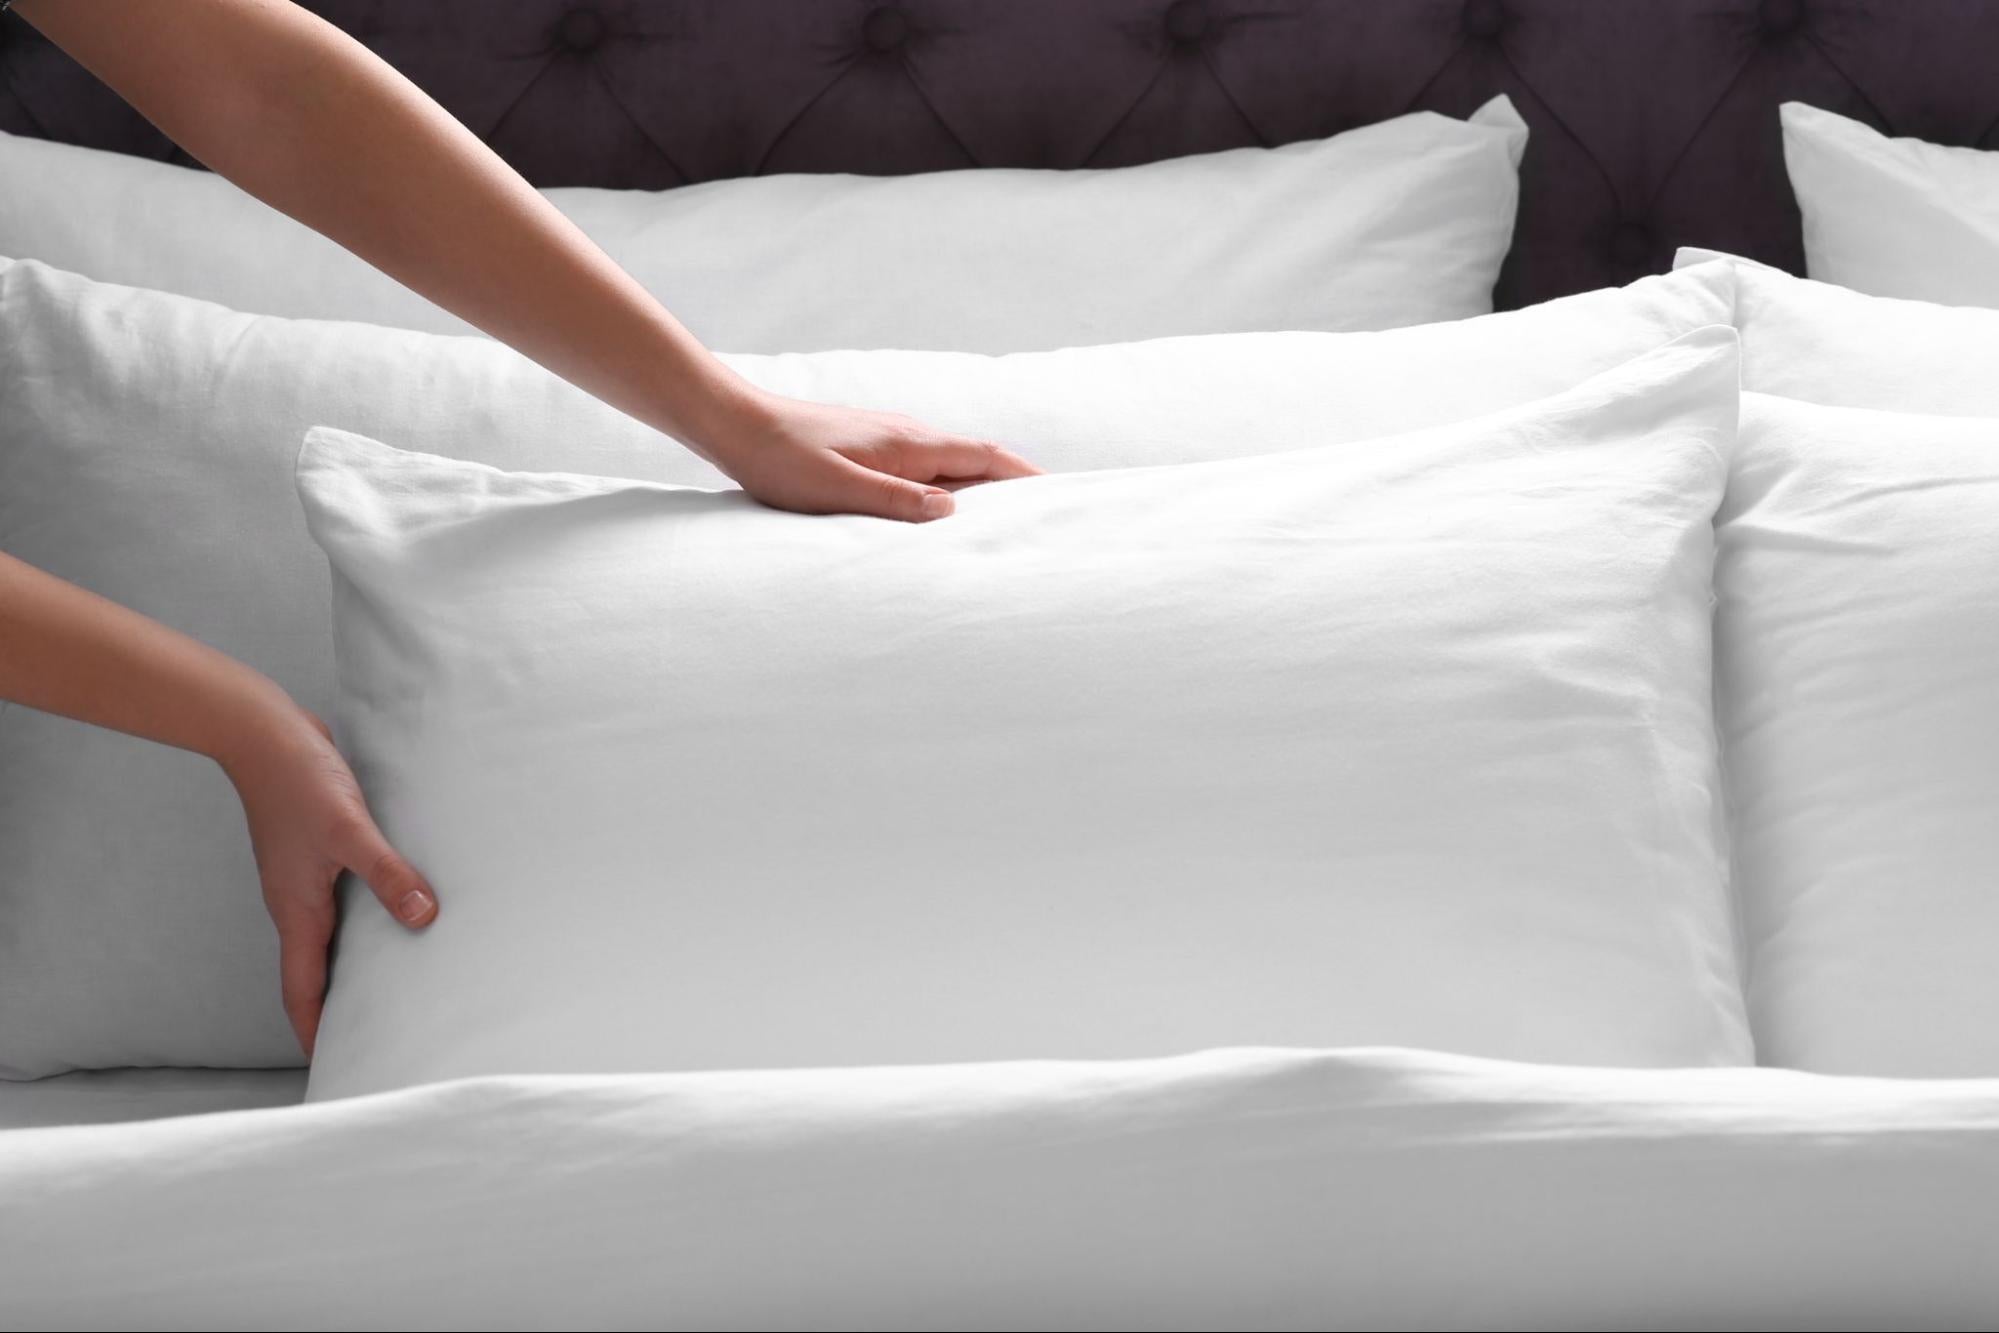 Timmins homeowner arranging pillows with white lyocell pillowcases on queen-sized bed